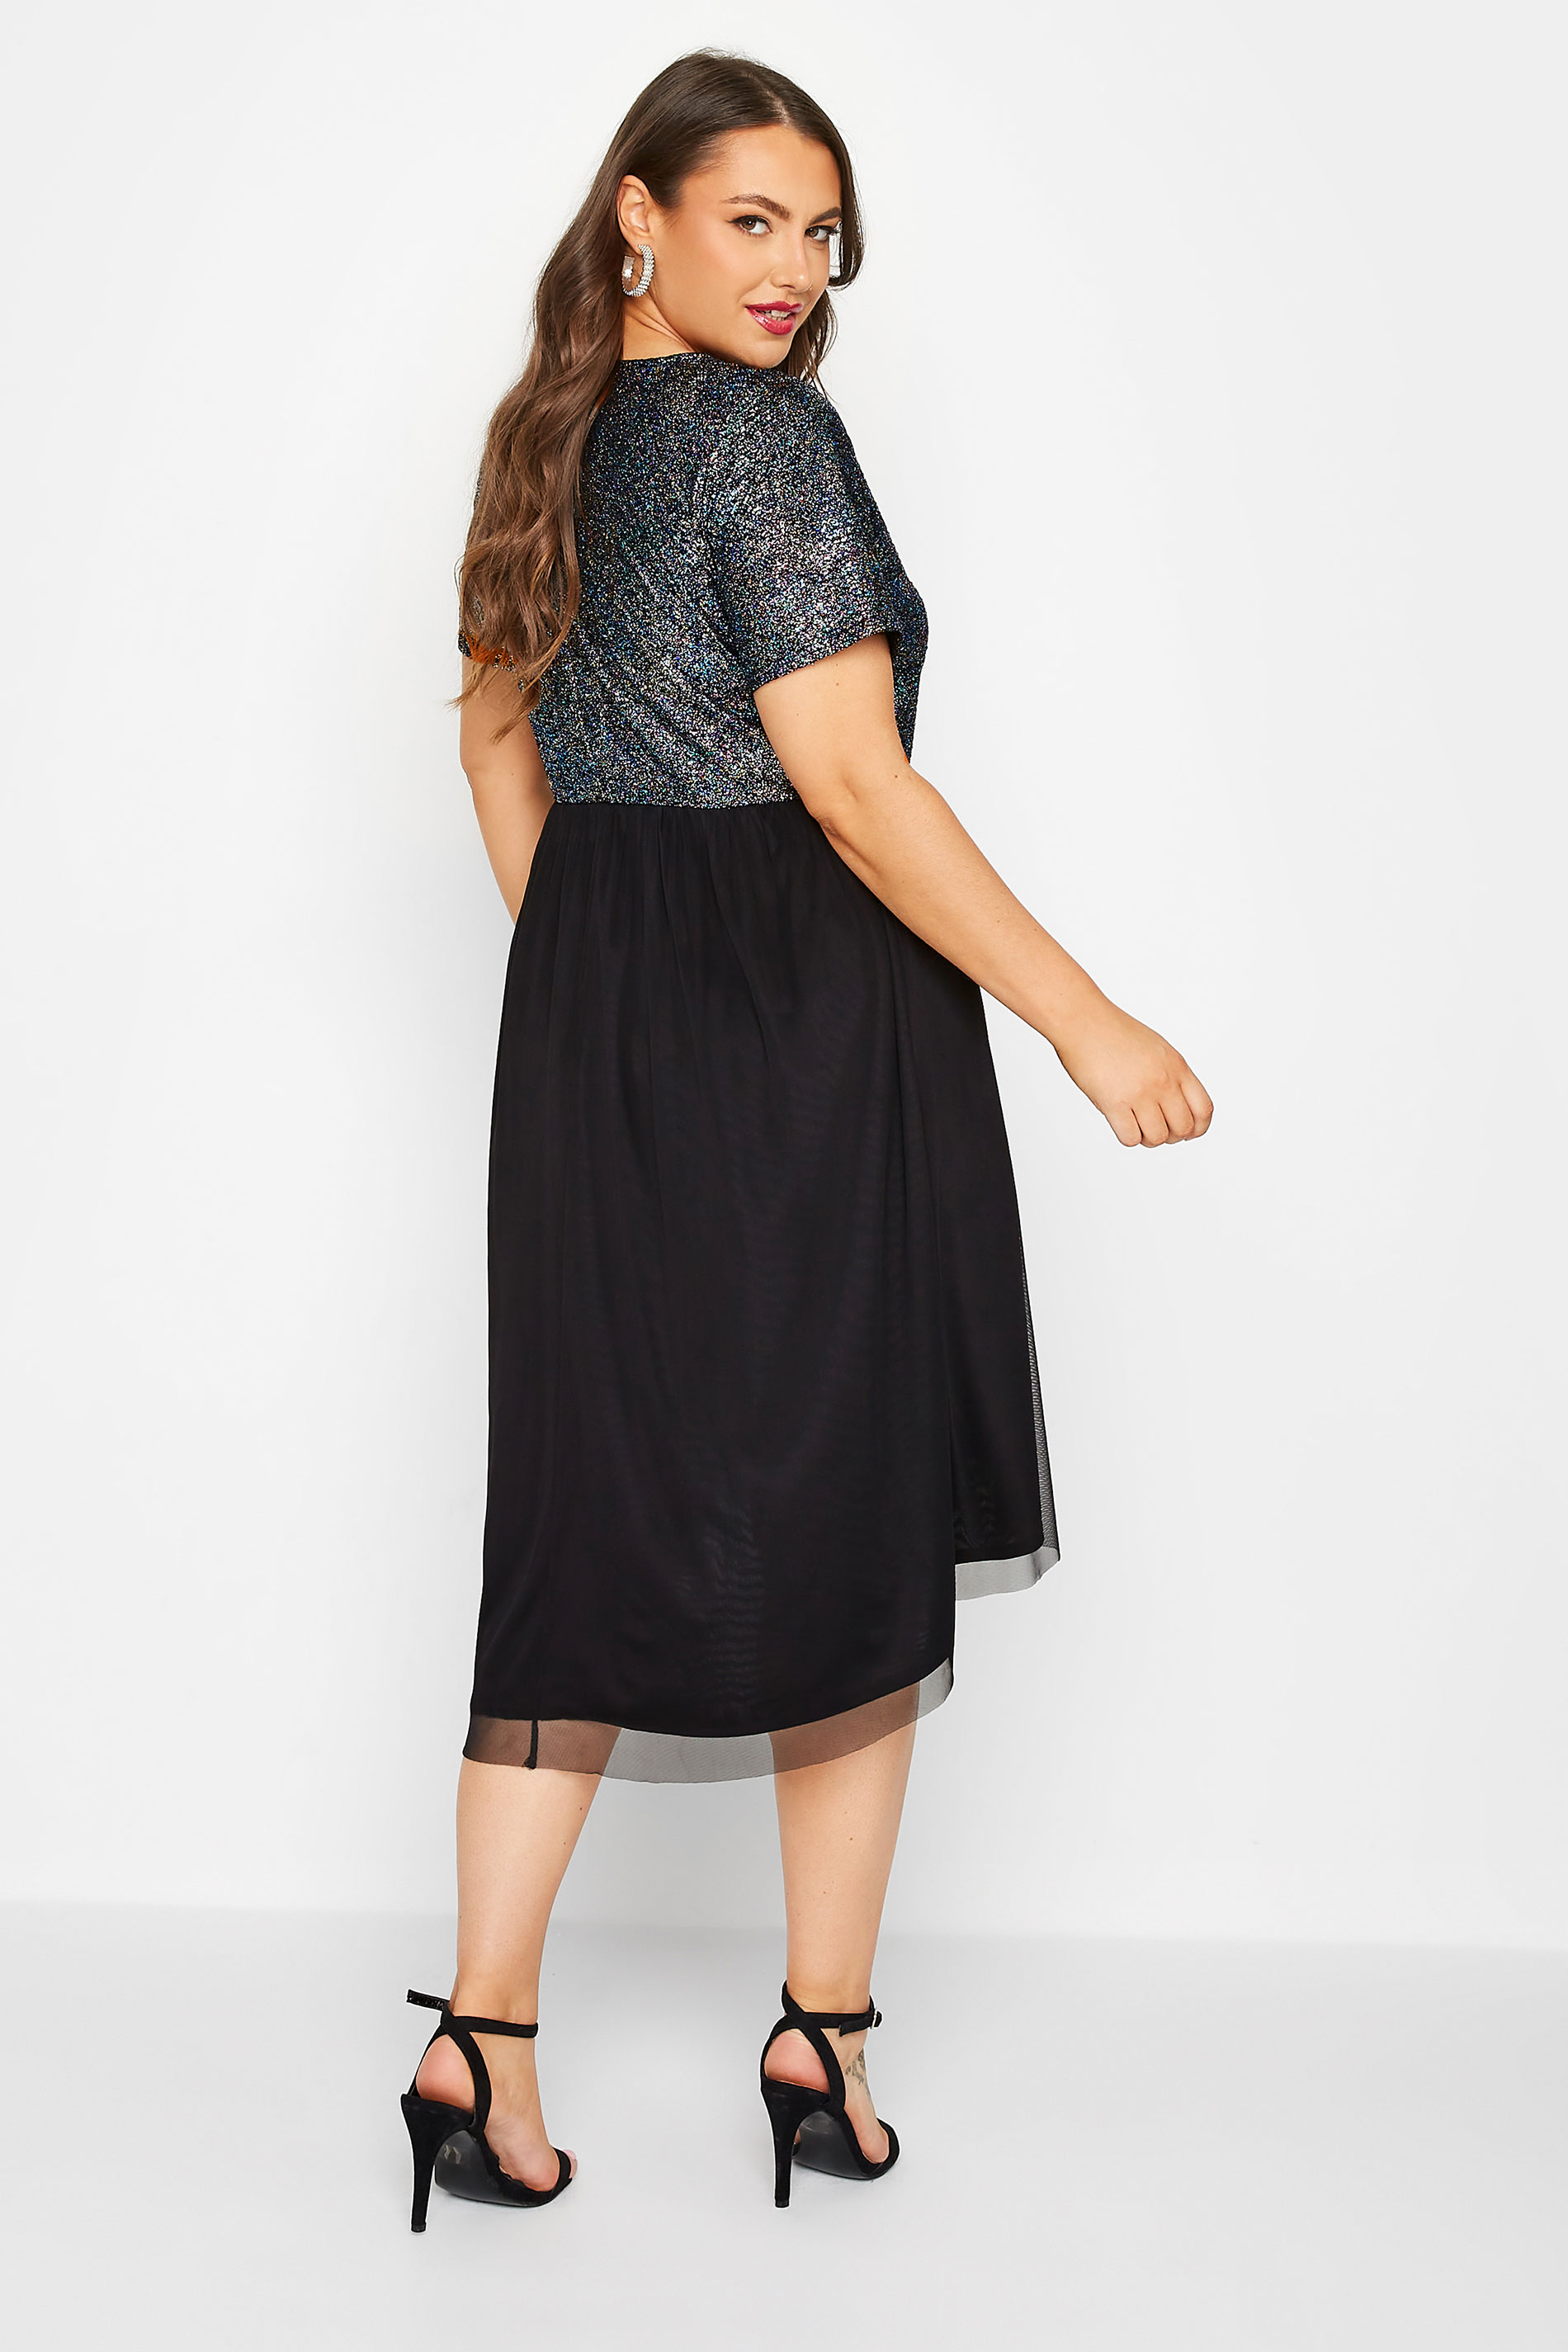 LIMITED COLLECTION Plus Size Black Glitter Mesh Dress | Yours Clothing 3